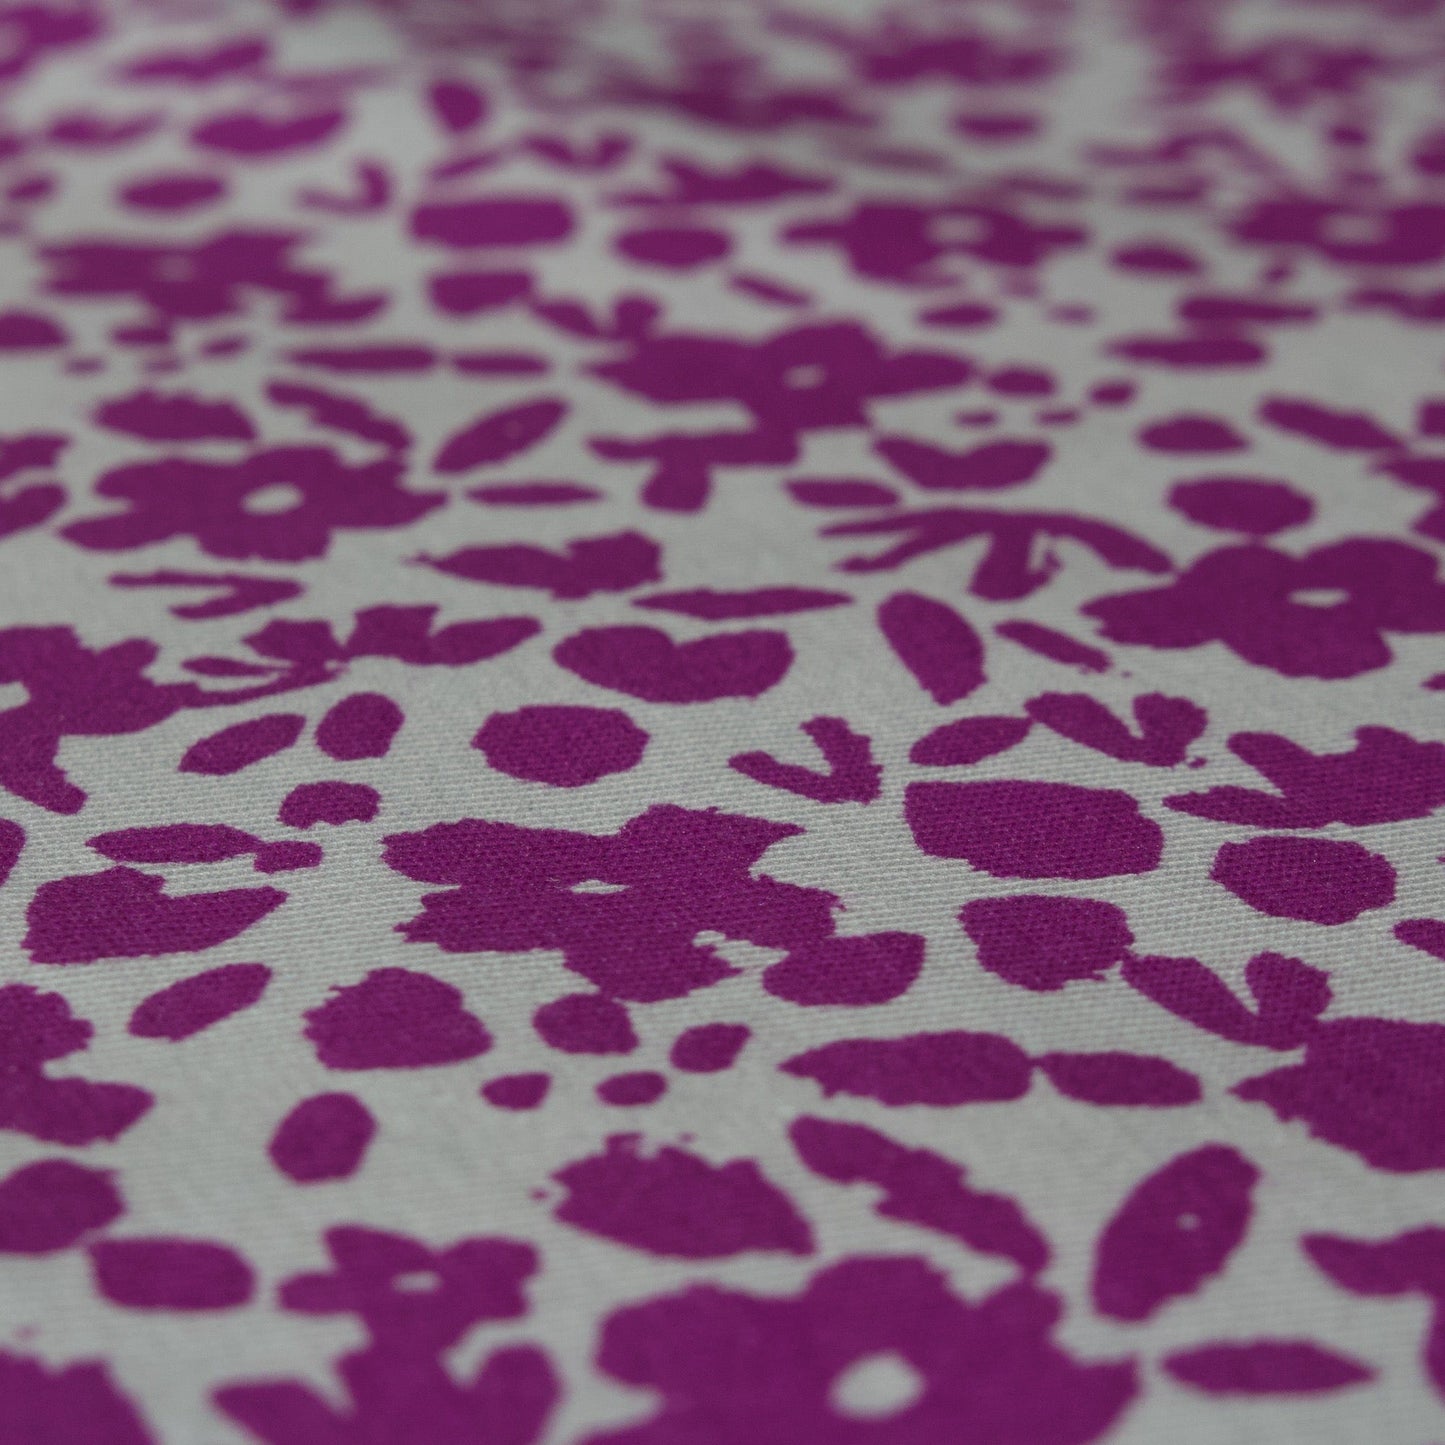 Cotton Jersey PU Coated Fabric with Floral Print in Purple on Grey